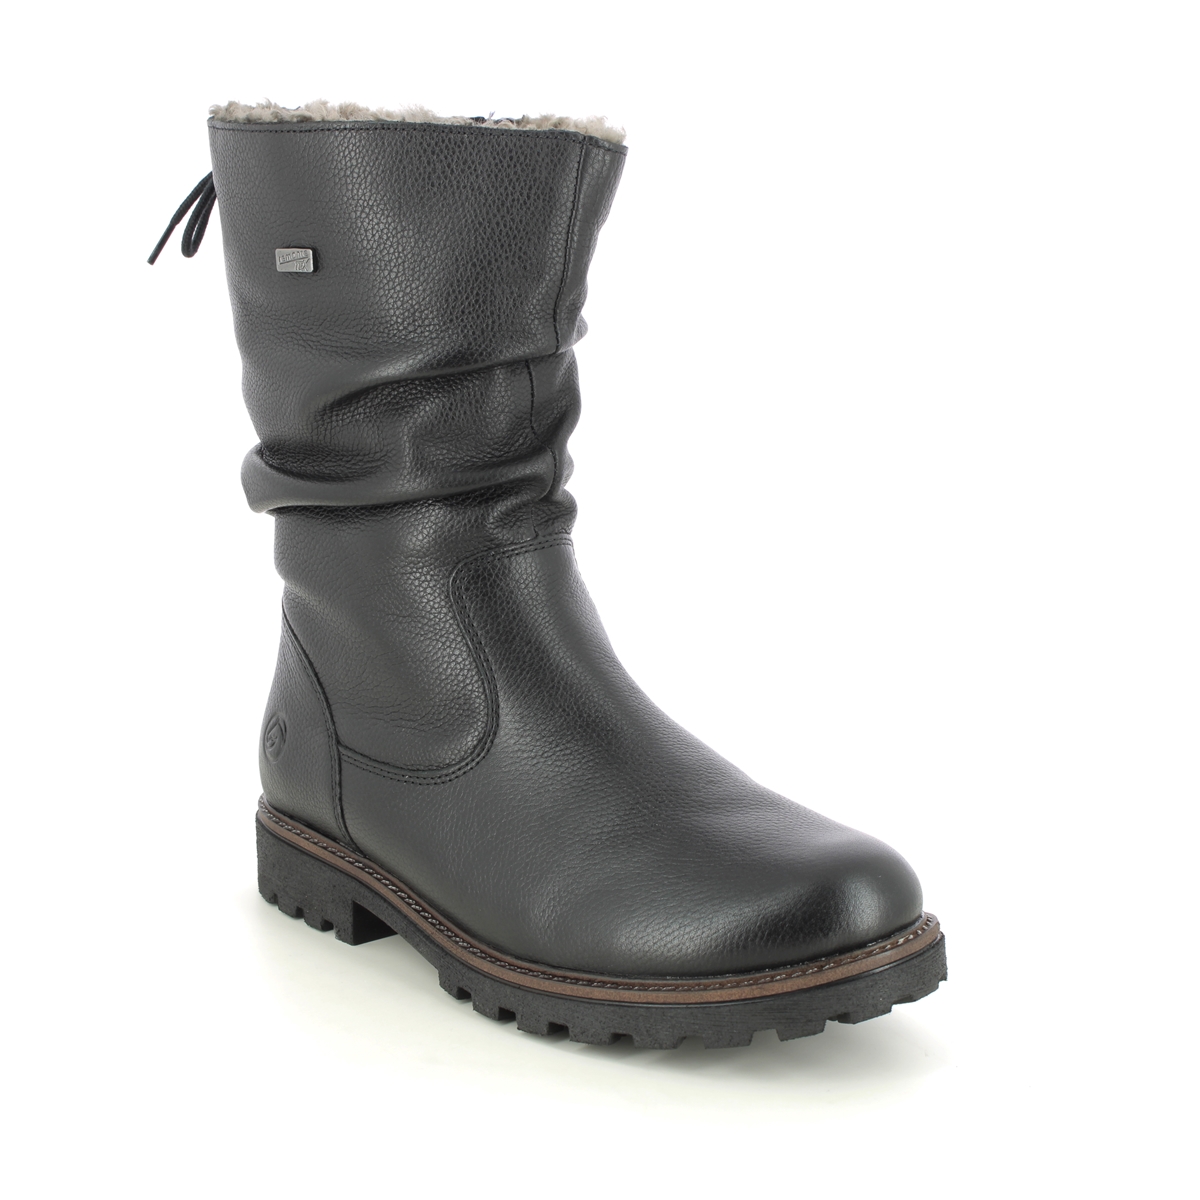 Remonte Brand Tex Sheep Black Leather Womens Mid Calf Boots D8477-01 In Size 37 In Plain Black Leather